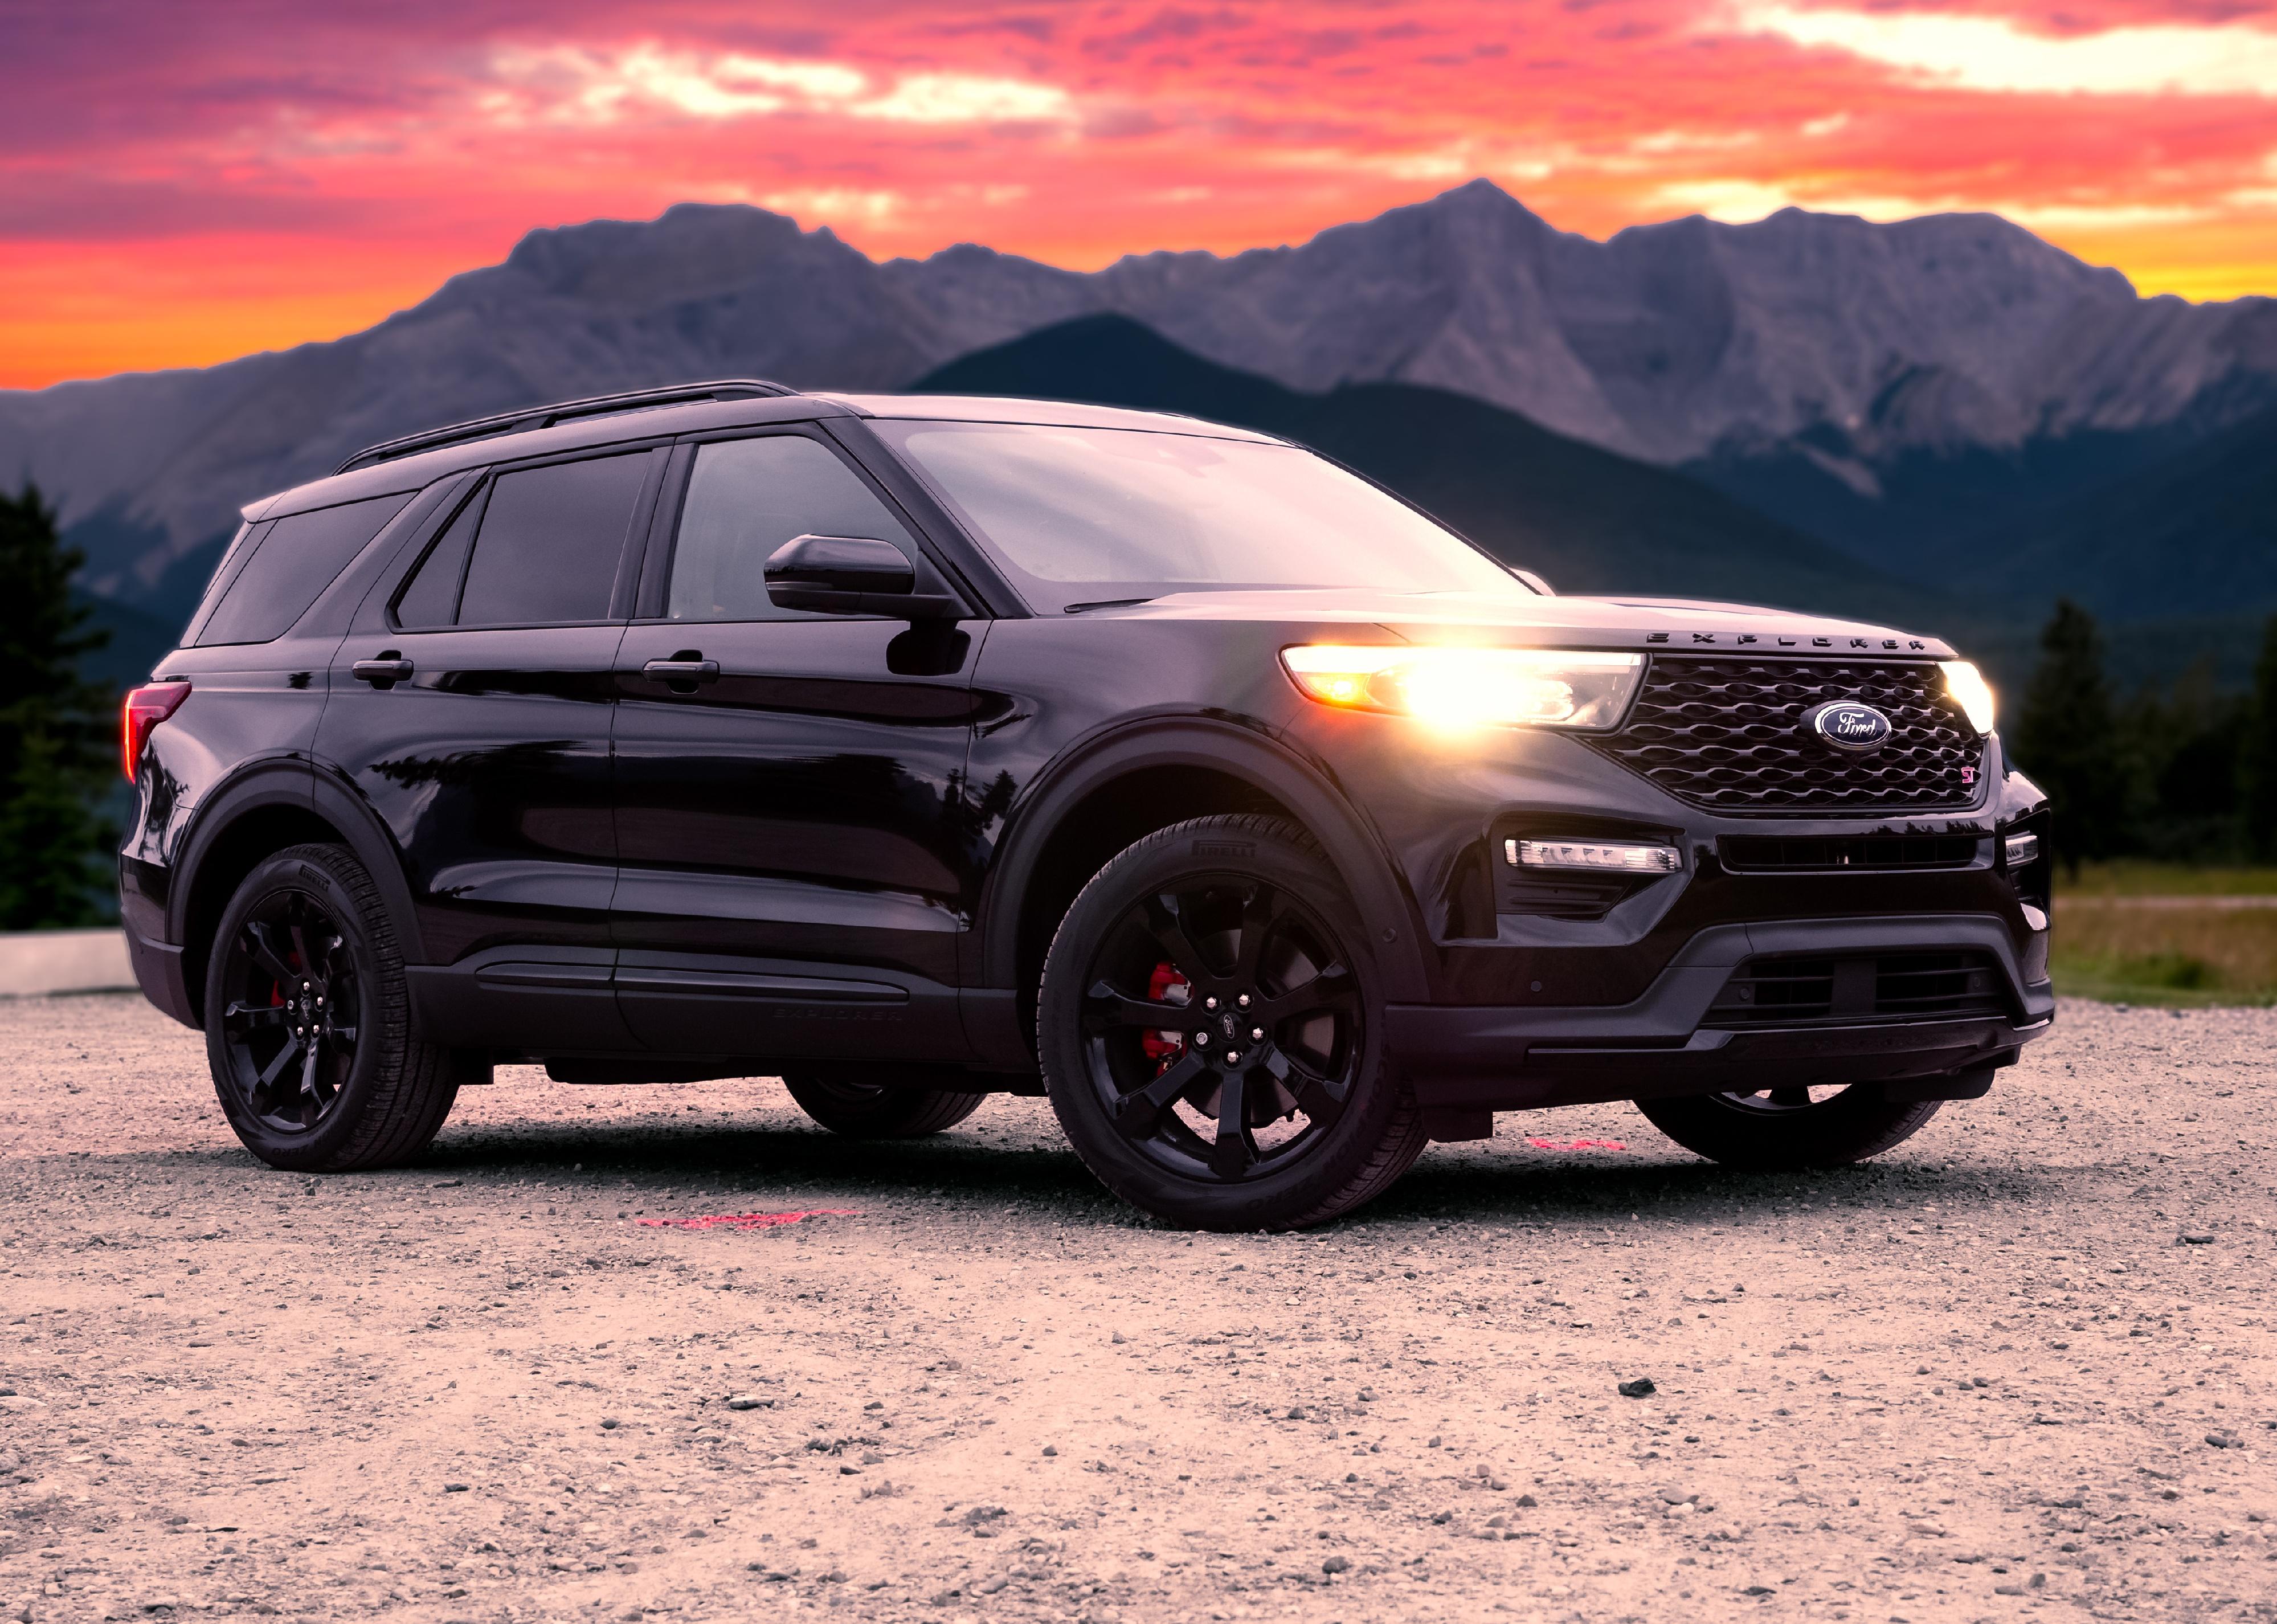 A 2020 Ford Explorer in front of mountains during a sunset.